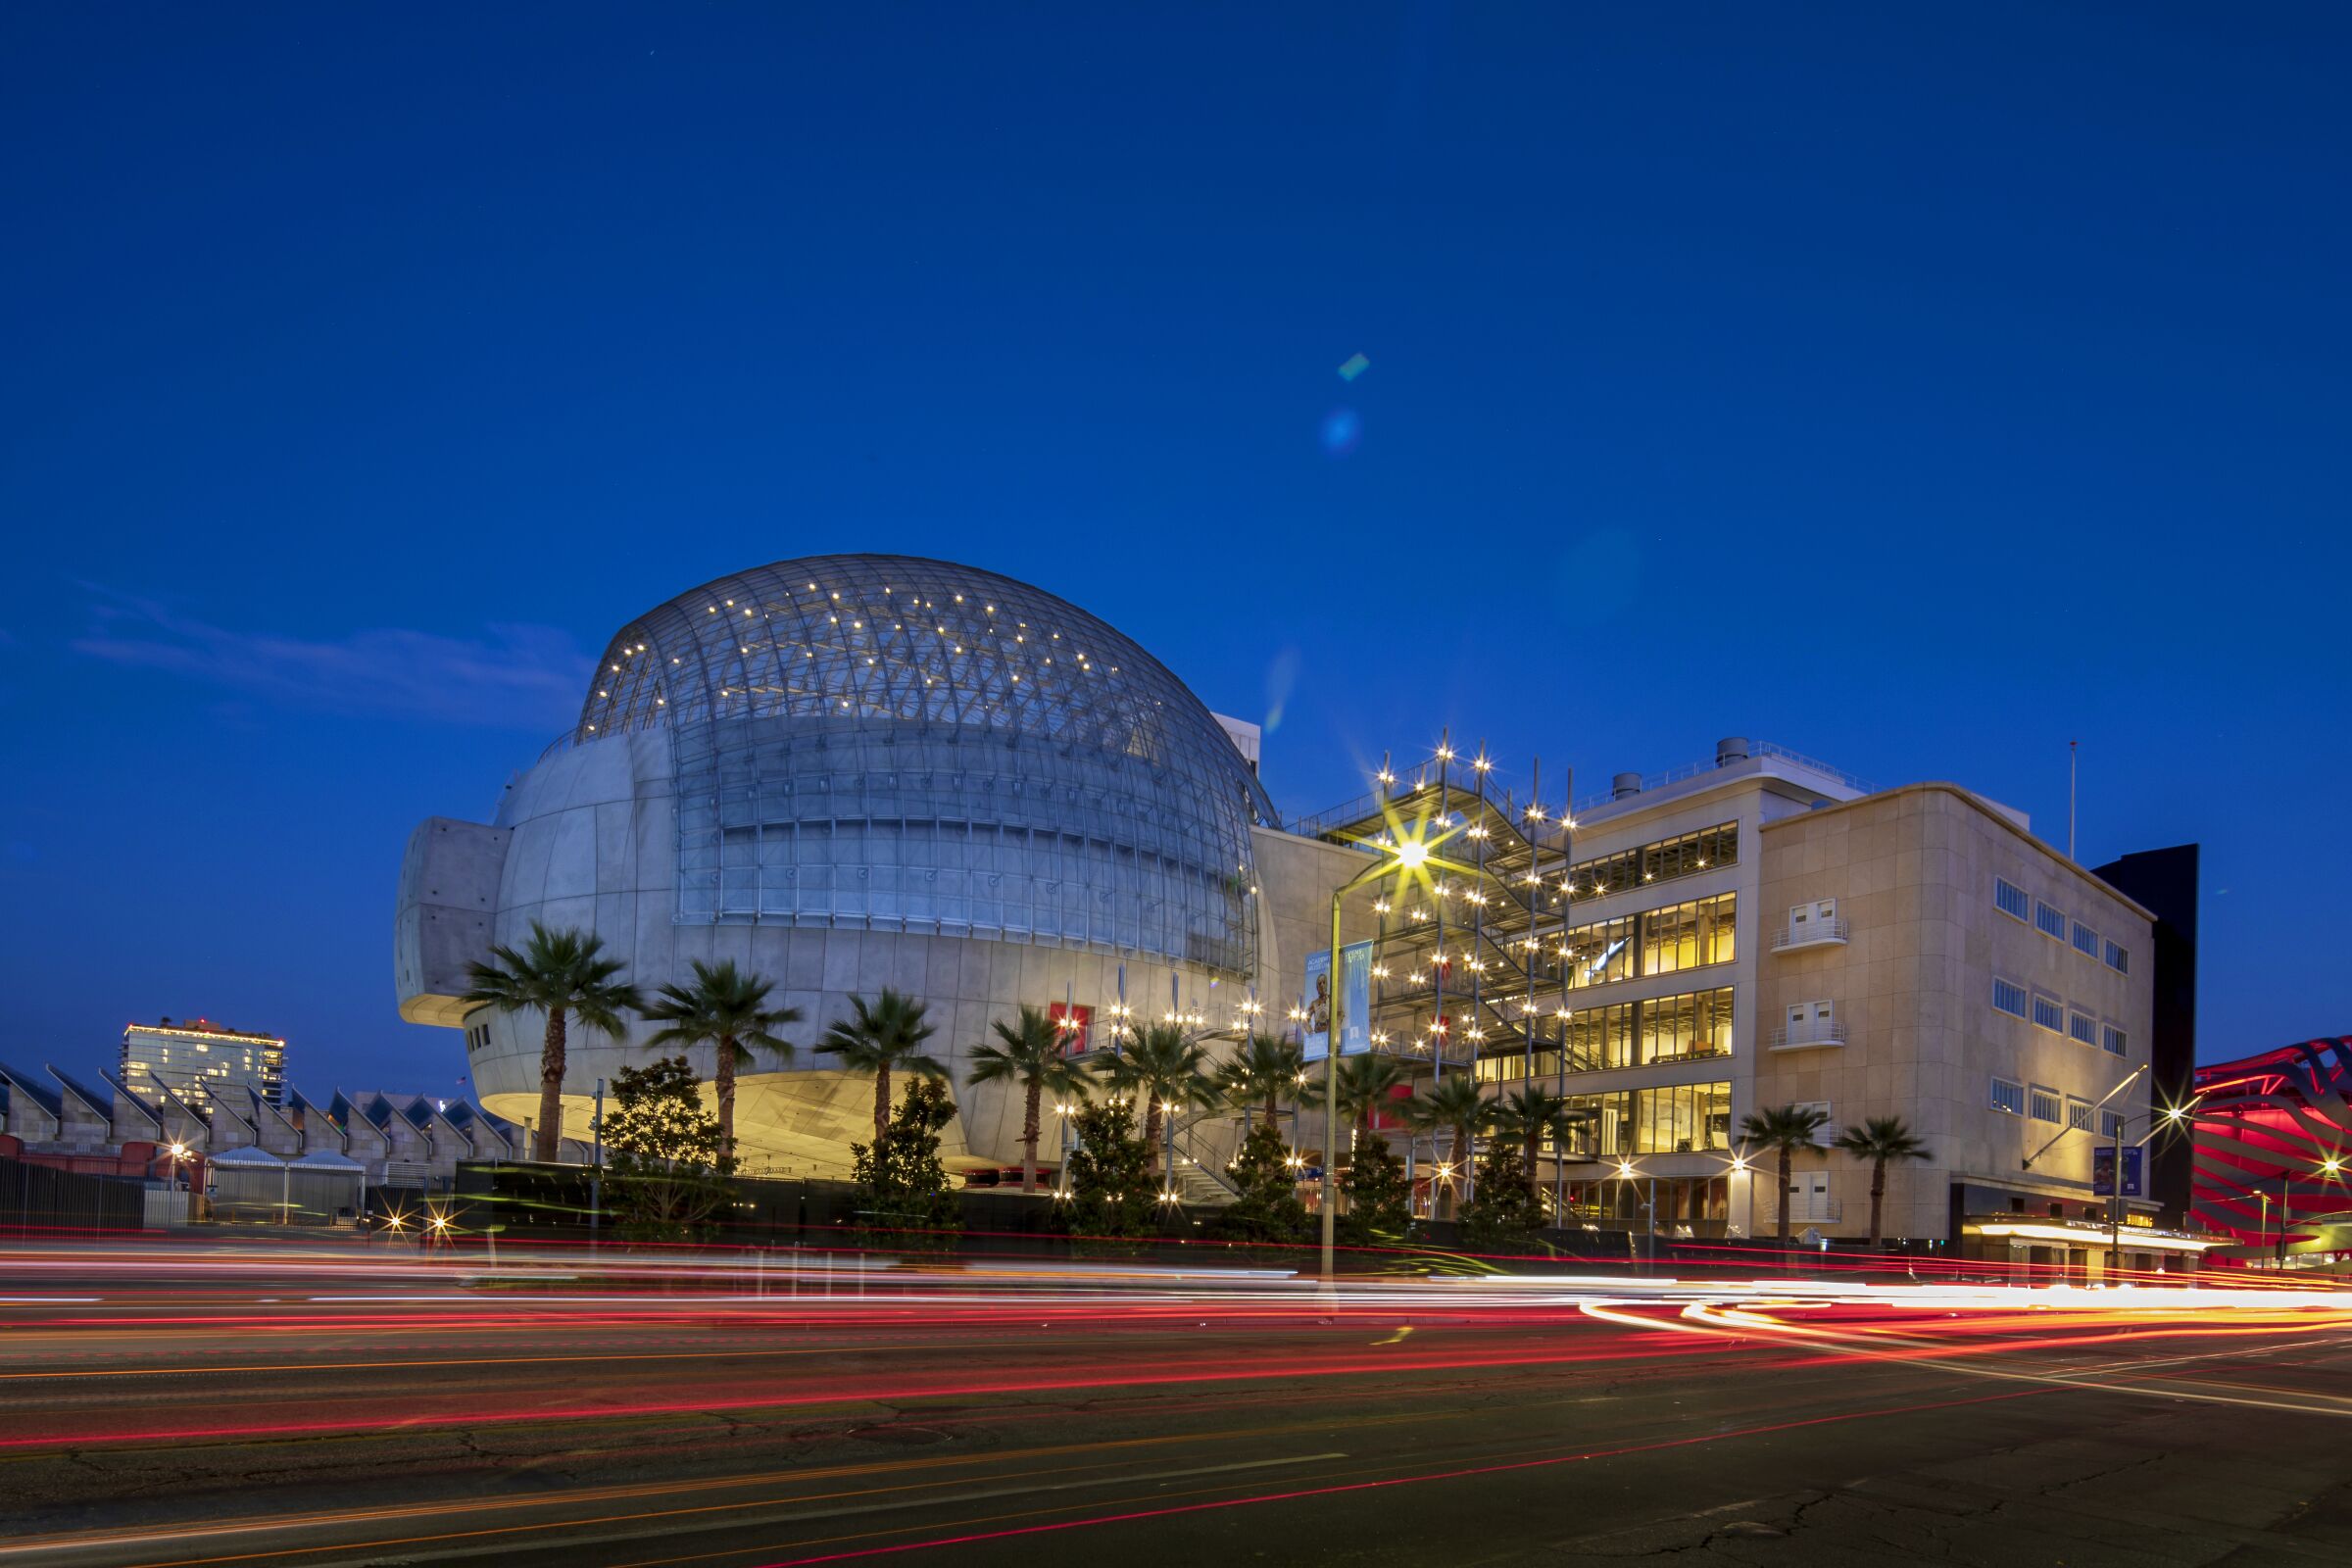 The Academy Museum of Motion Pictures, seen at dusk, with its giant spherical theater.